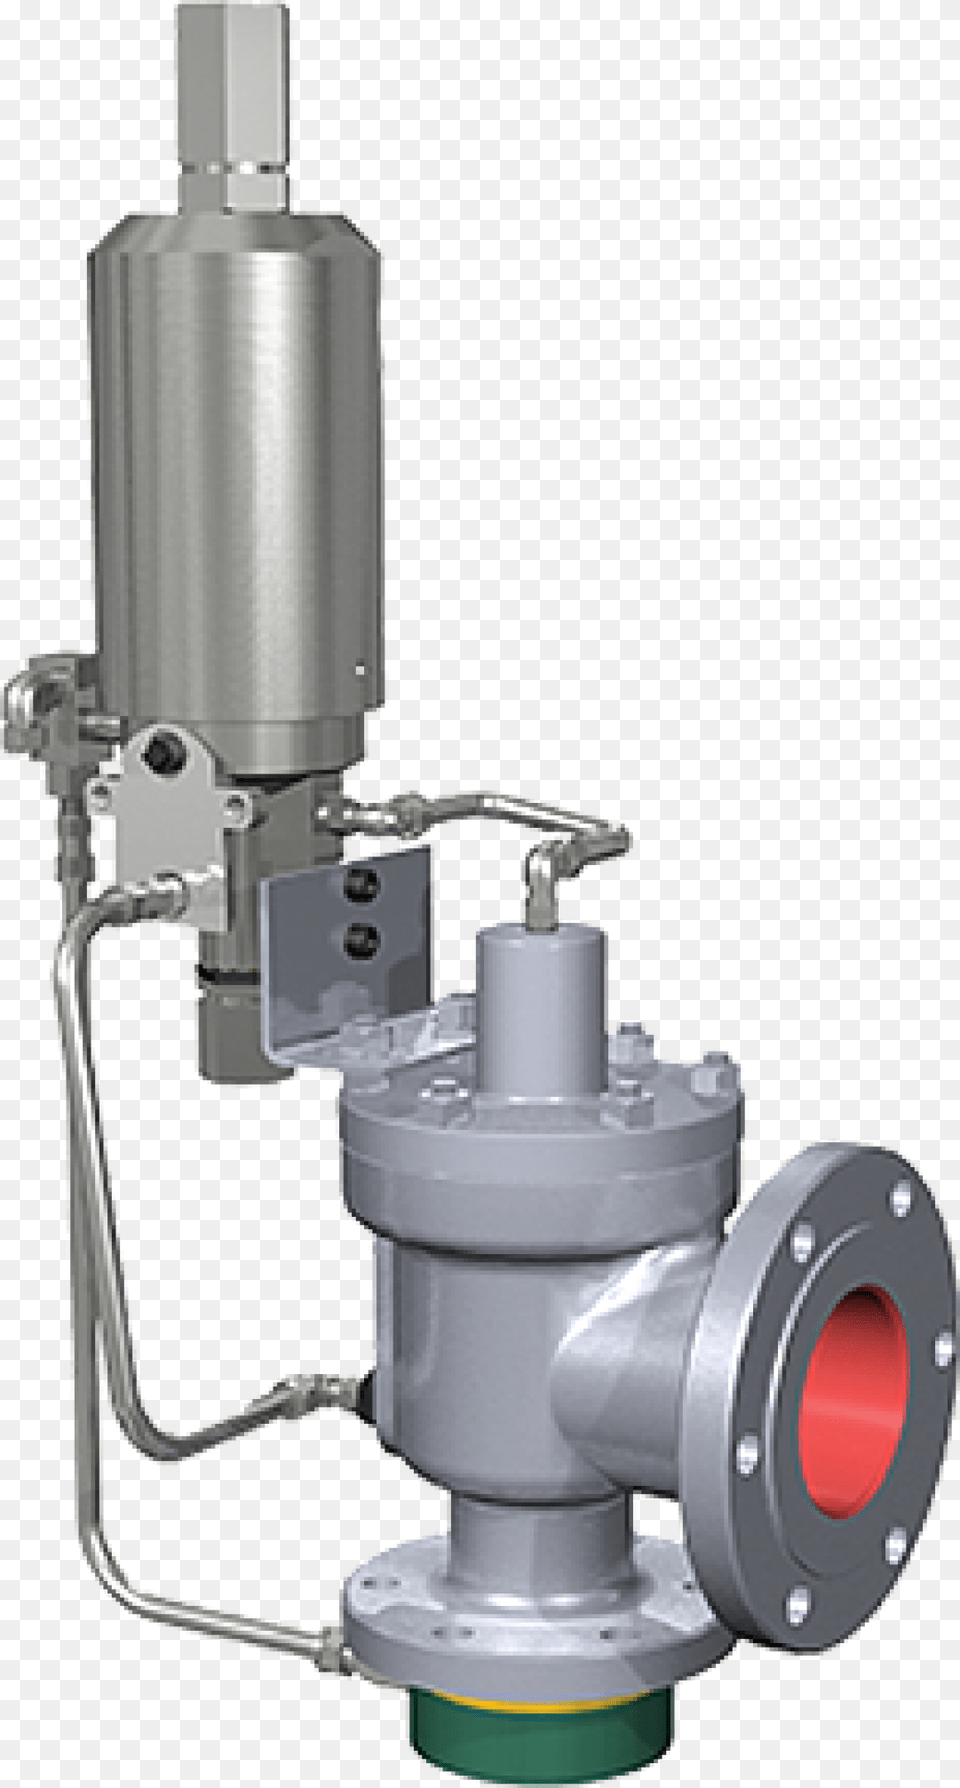 Series Pilot Operated Safety Relief Valve Consolidated Pilot Operated Relief Valves, Machine, Bottle, Shaker, Smoke Pipe Free Png Download